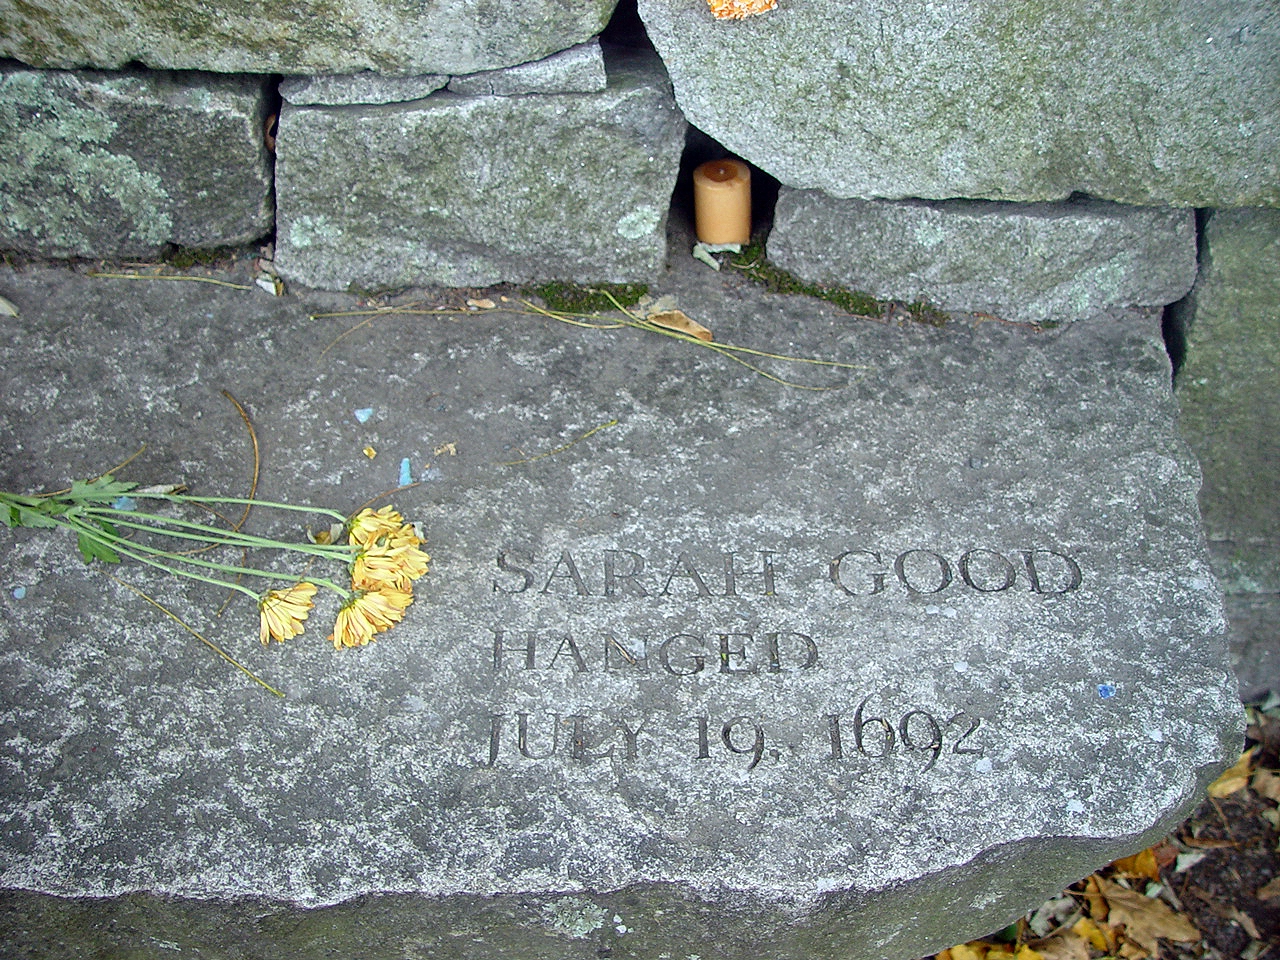 Colour photograph of a grey stone with wilted yellow flowers upon it and an inscription that reads "Sarah Good hanged July 19, 1692".